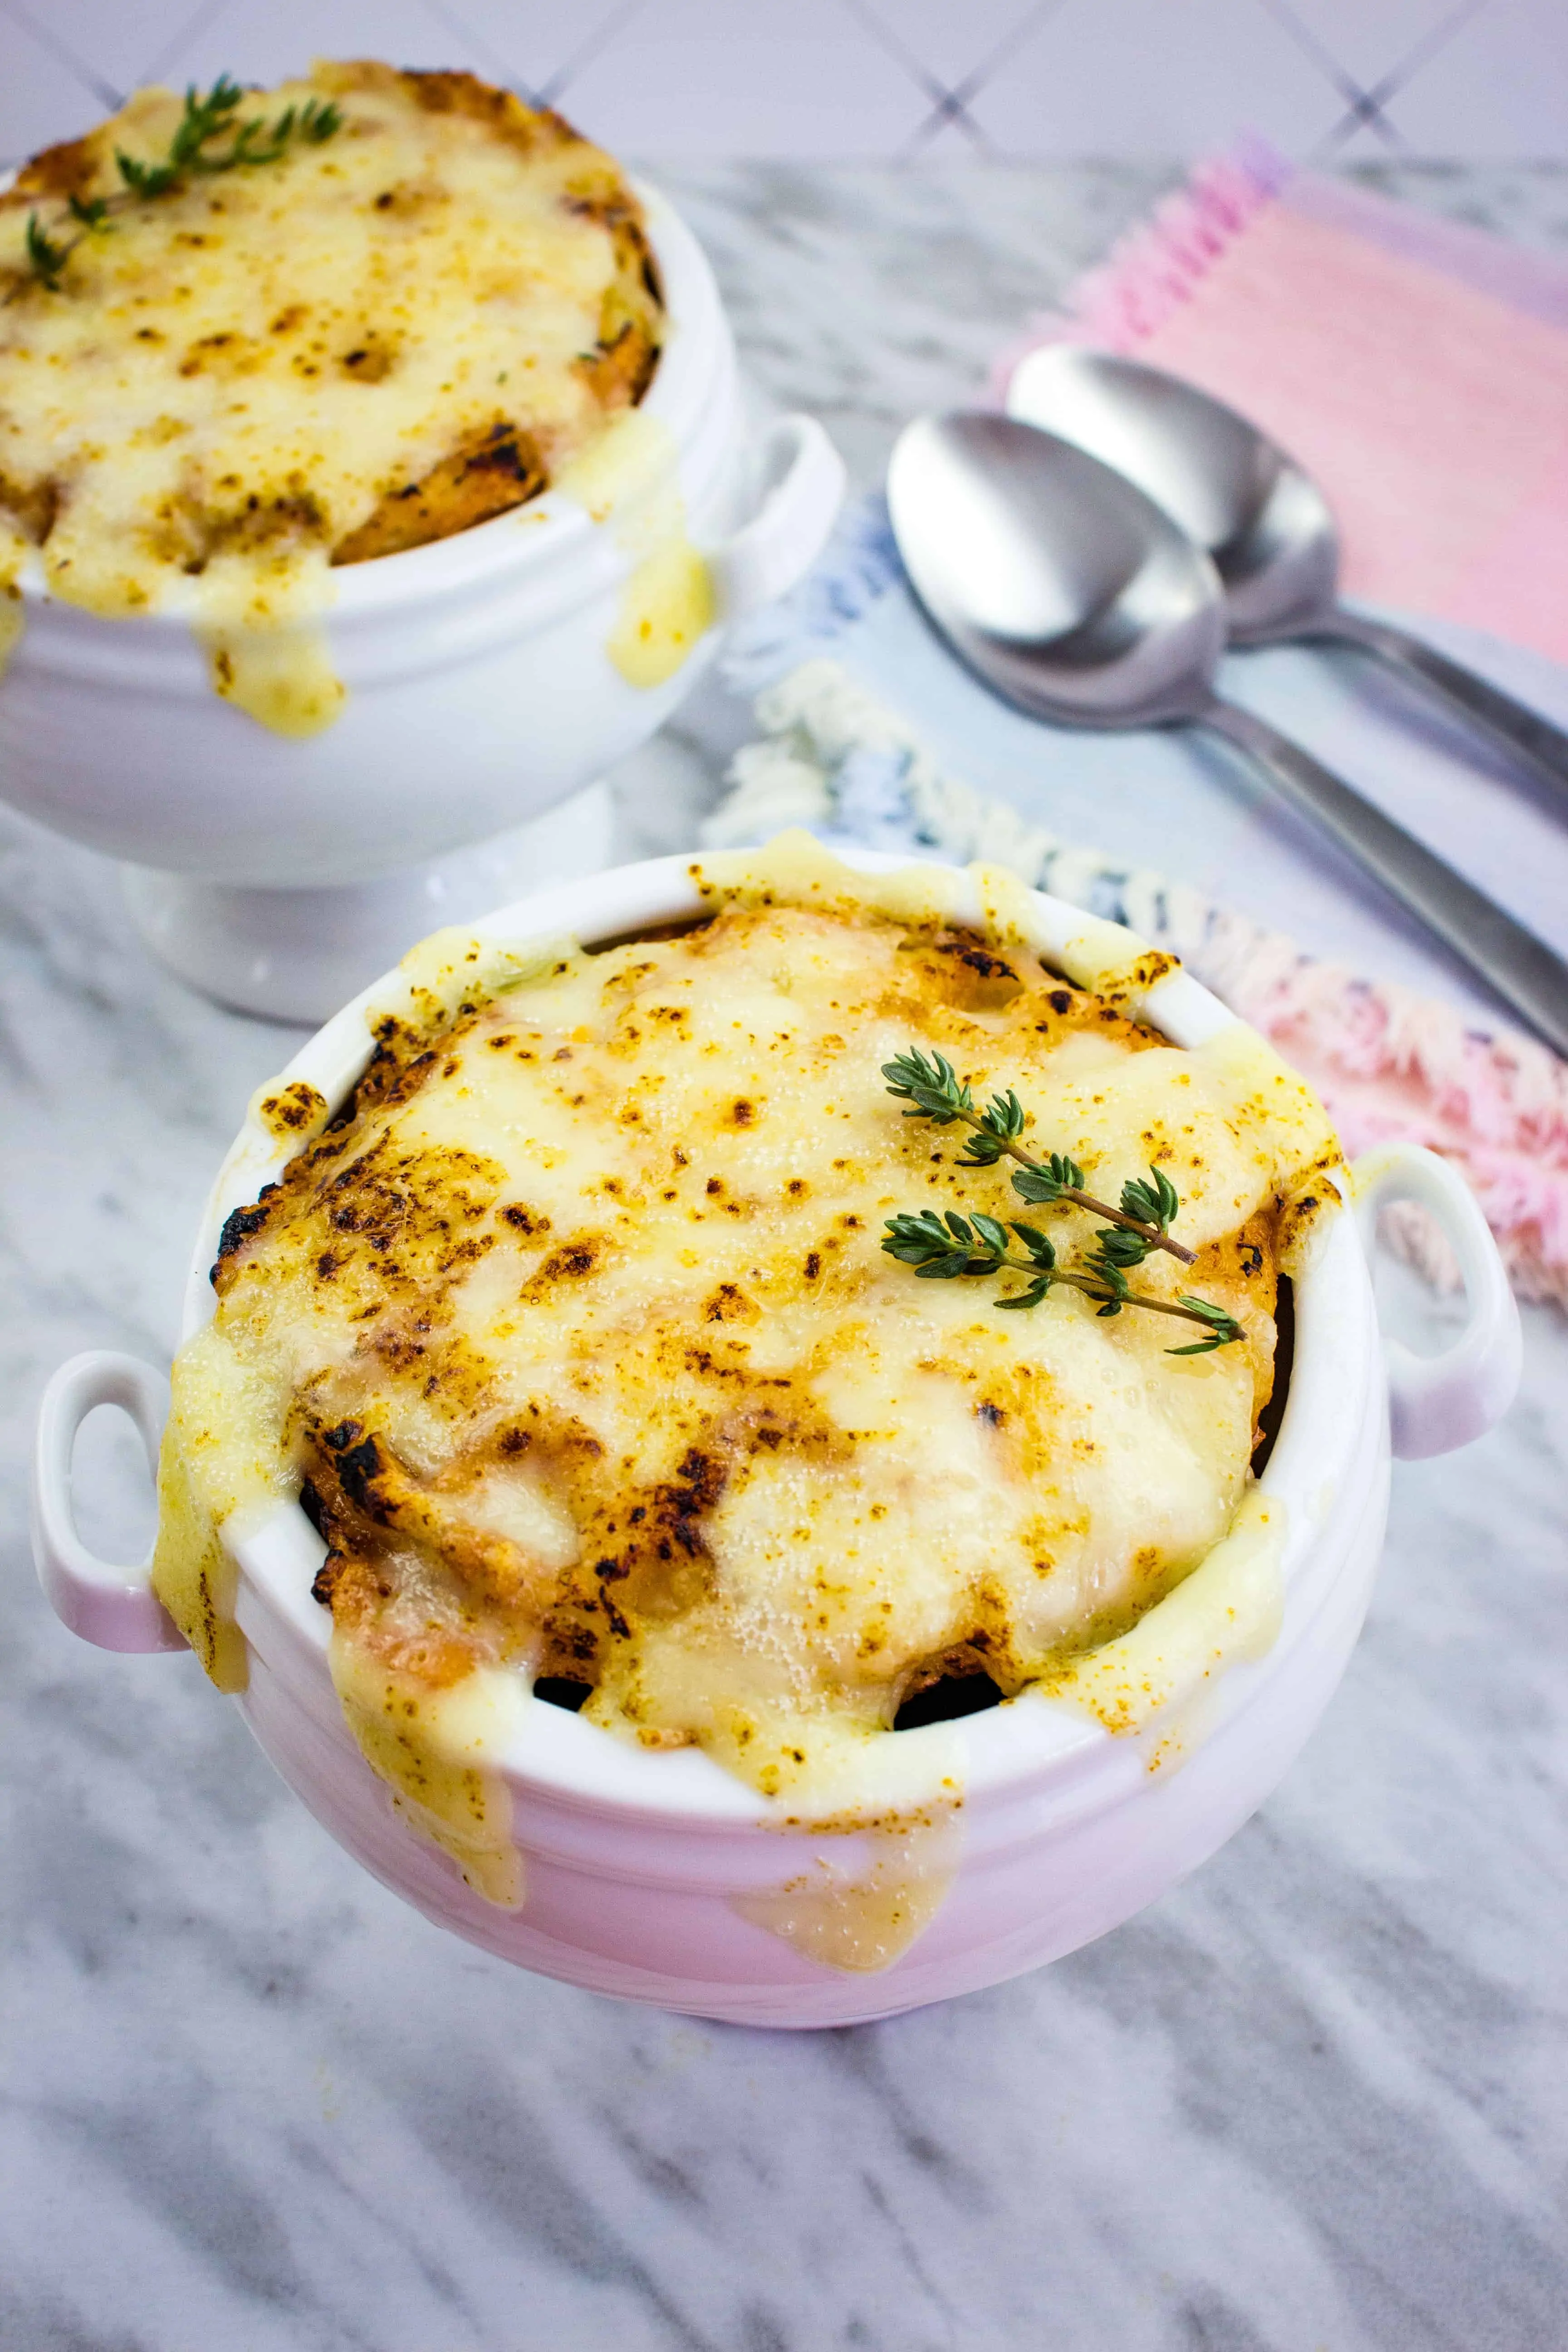 keto french onion soup topped with a cheesy layer